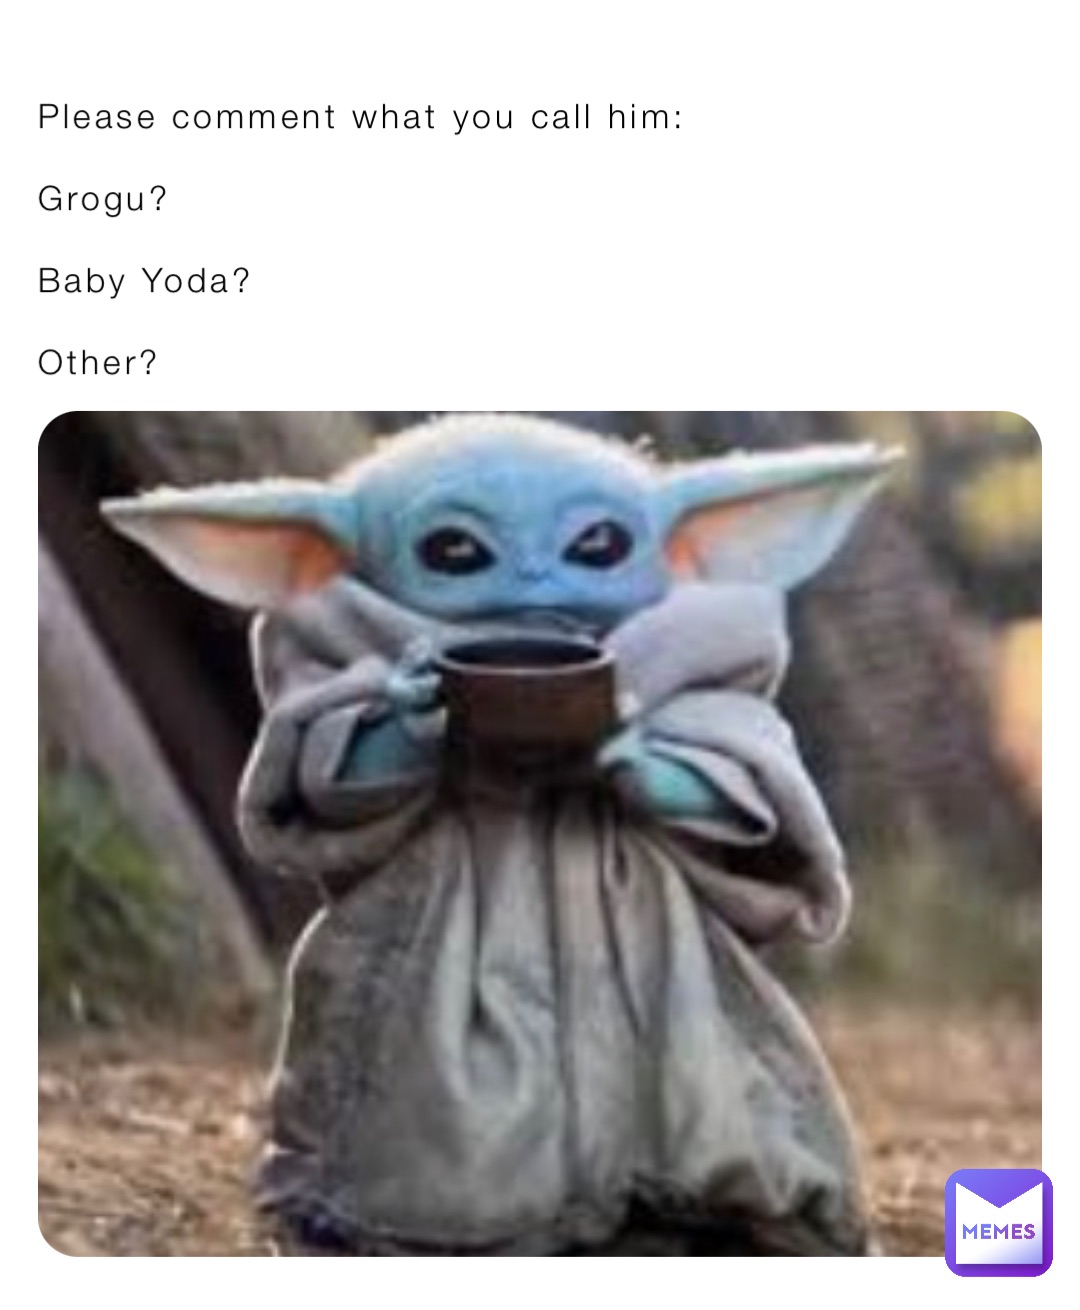 Please comment what you call him:

Grogu?

Baby Yoda?

Other?